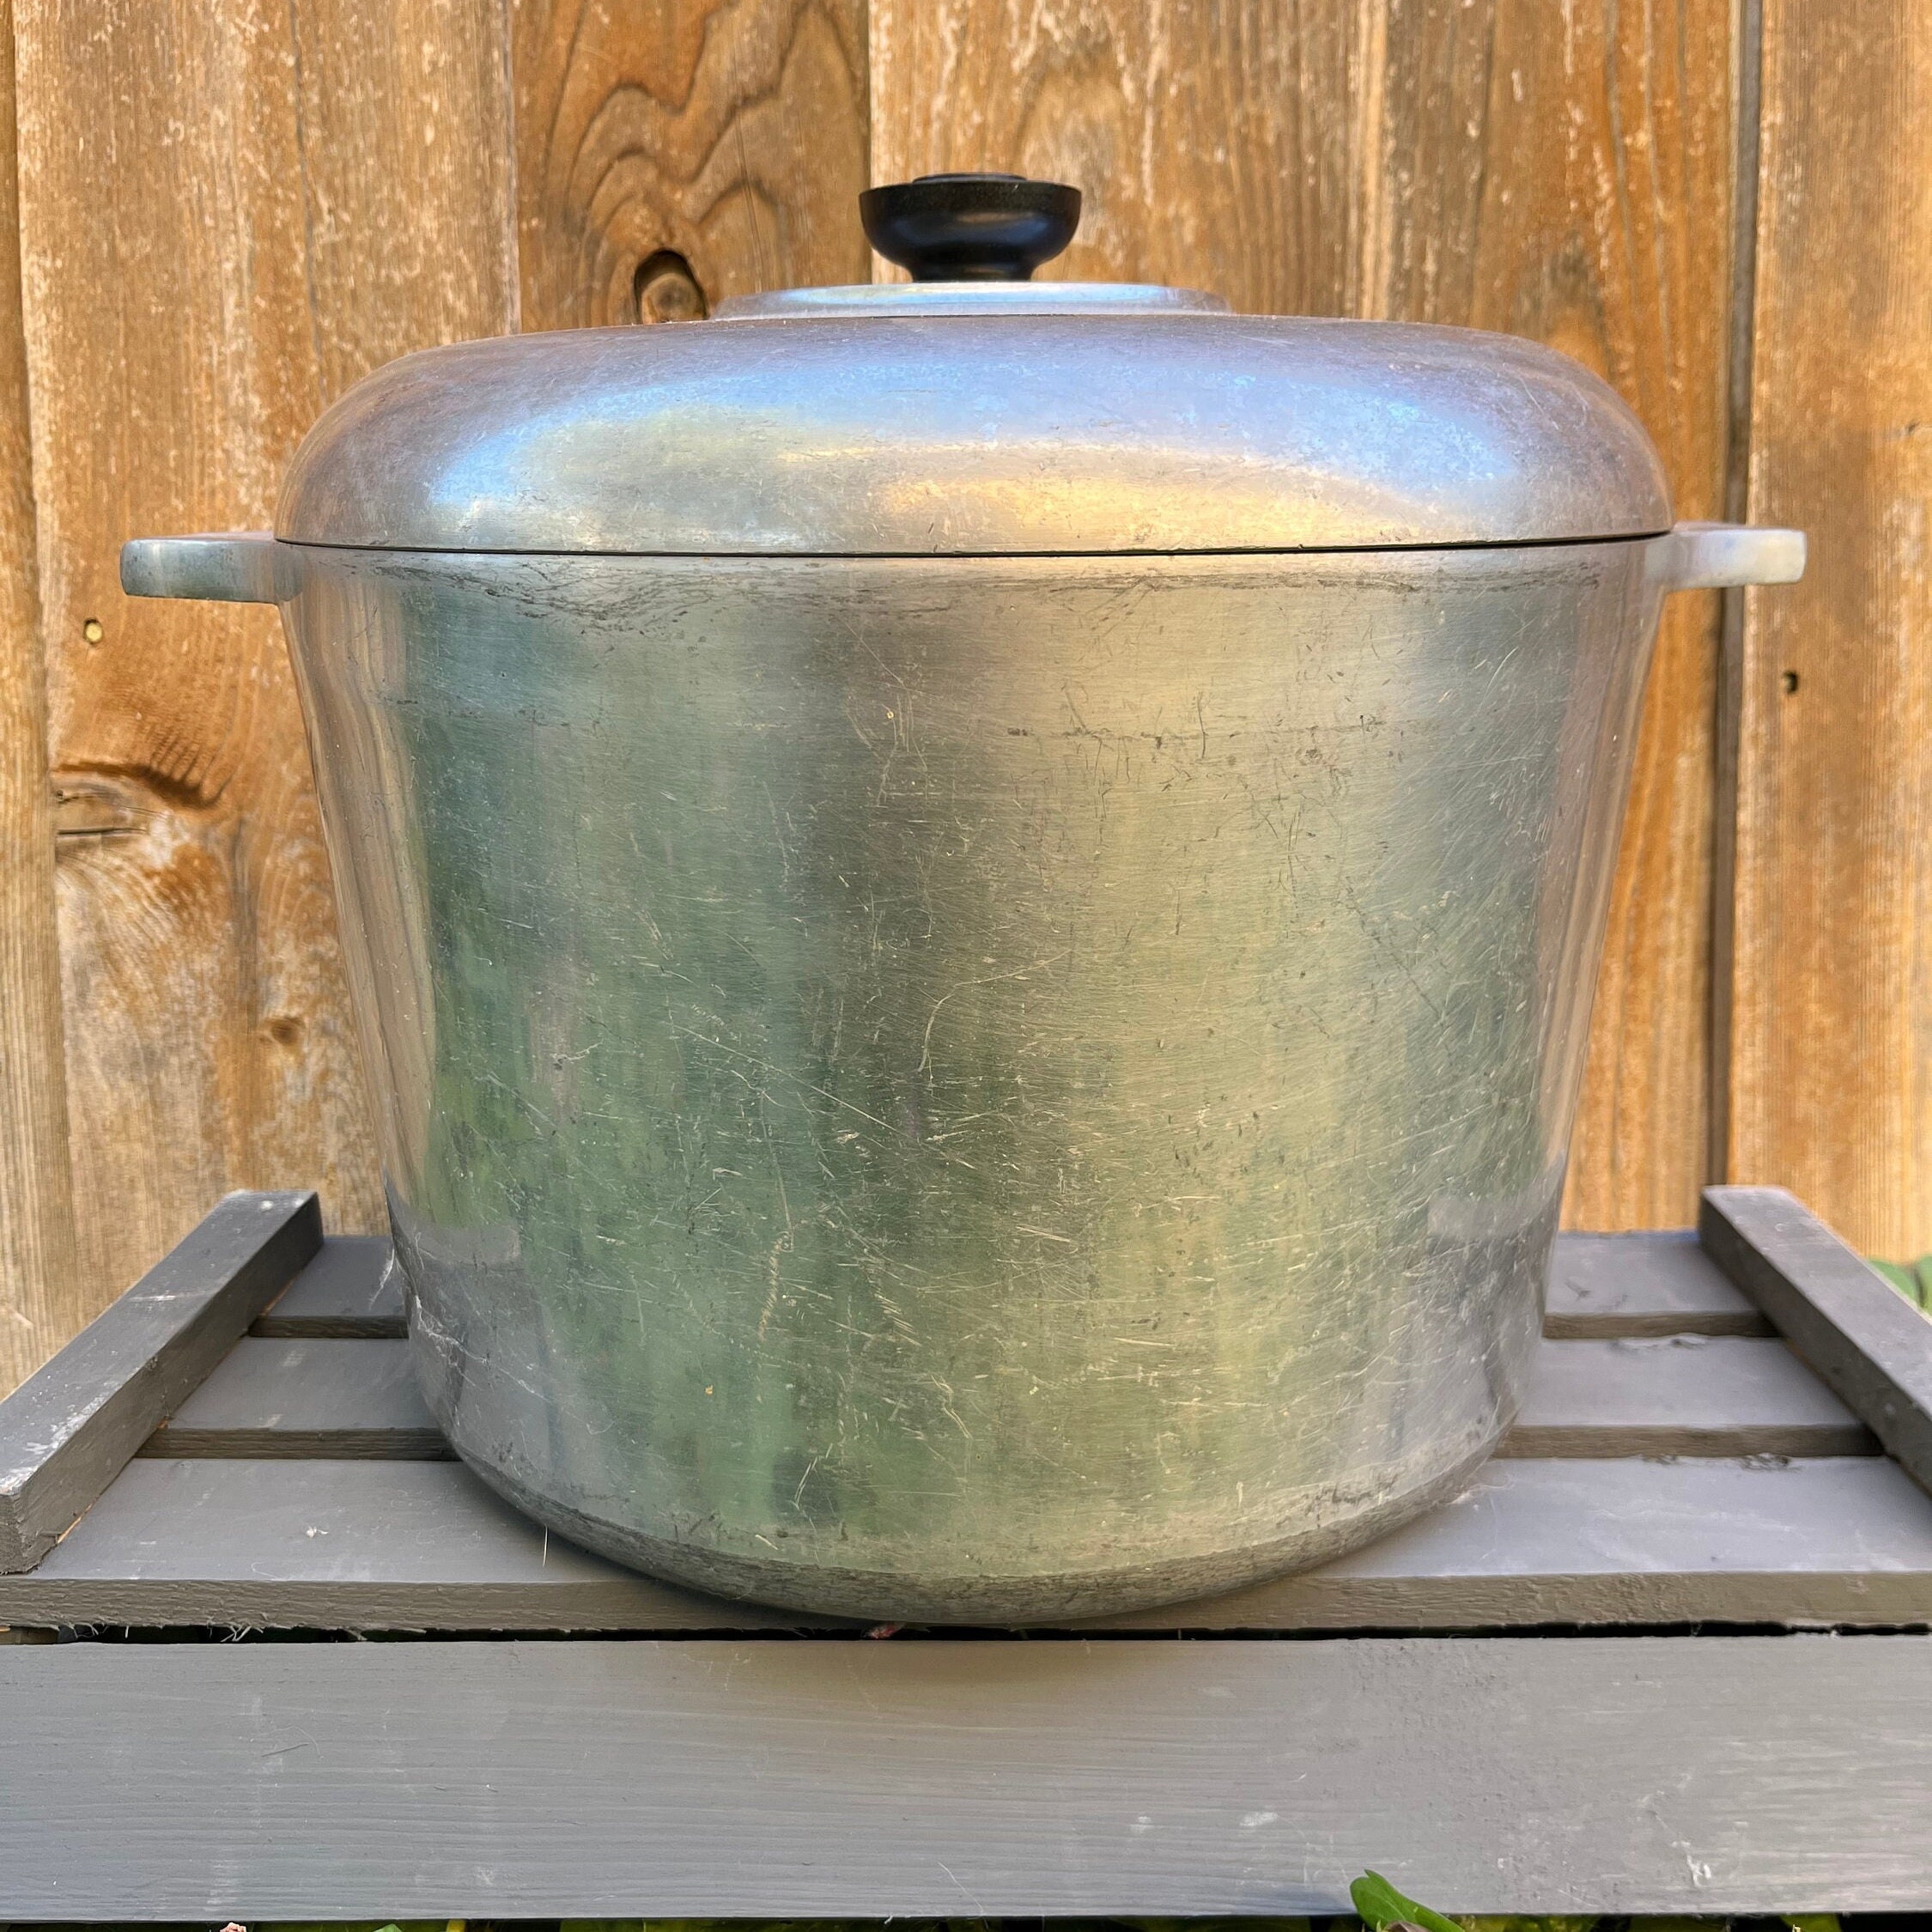 Antique Magnalite GHC (formerly Wagner Mfg. Co of Sydney O) Cast Aluminum  12QT Stock Pot with Lid, Bakelite Knob, Circa 1969, Made in U.S.A.